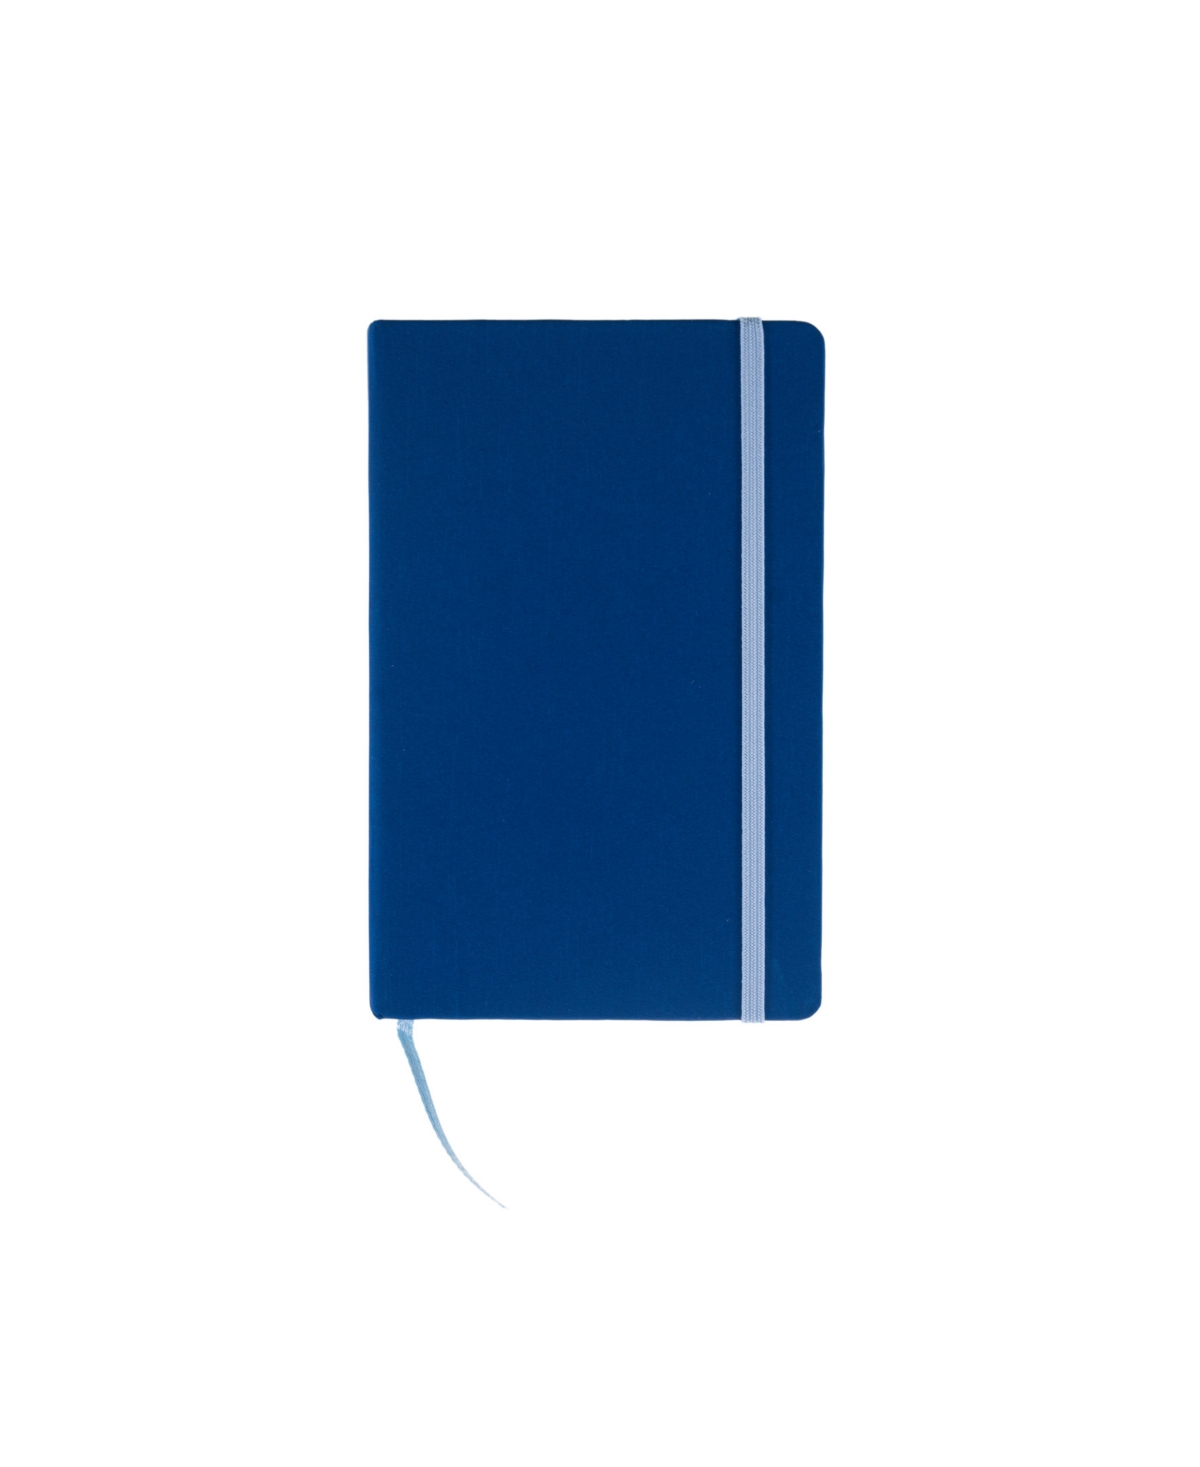 Ispira Hard Cover Lined Notebook, 3.5" x 5.5" - Blue